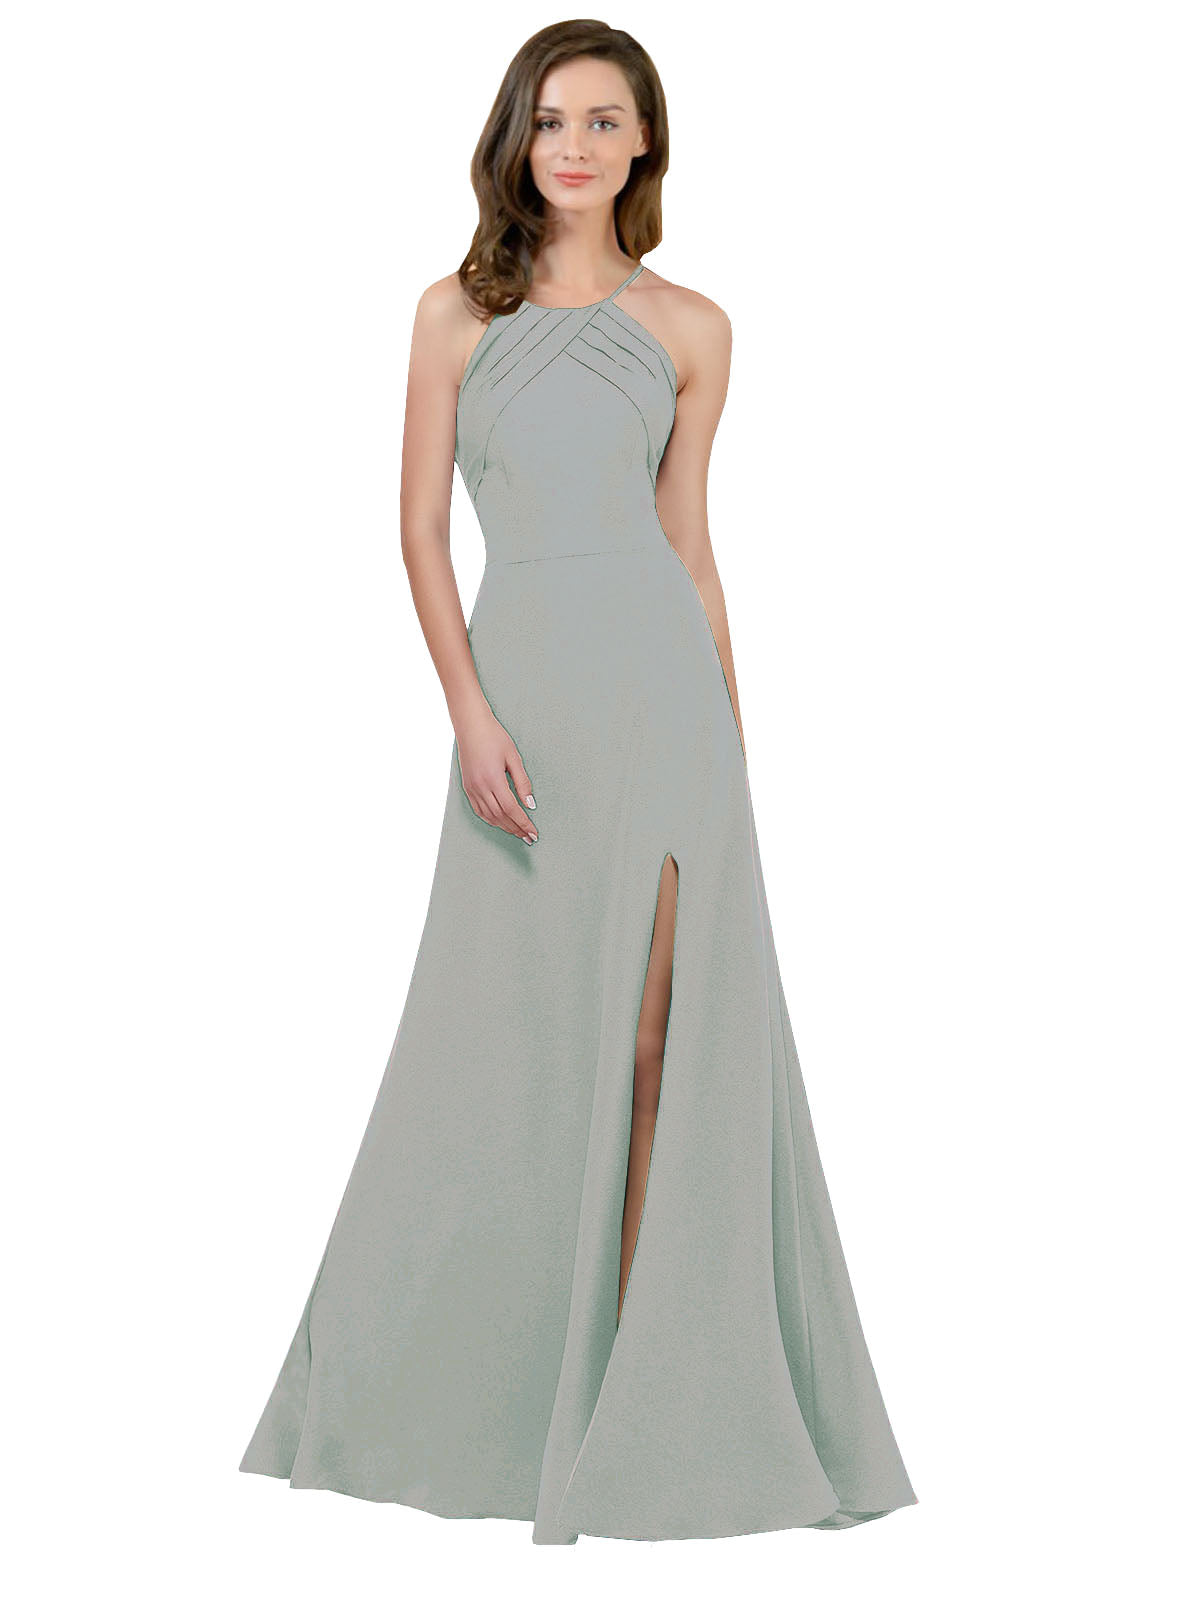 Oyster Silver A-Line High Neck Jewel Sleeveless Long Bridesmaid Dress Themi with Keyhole Back